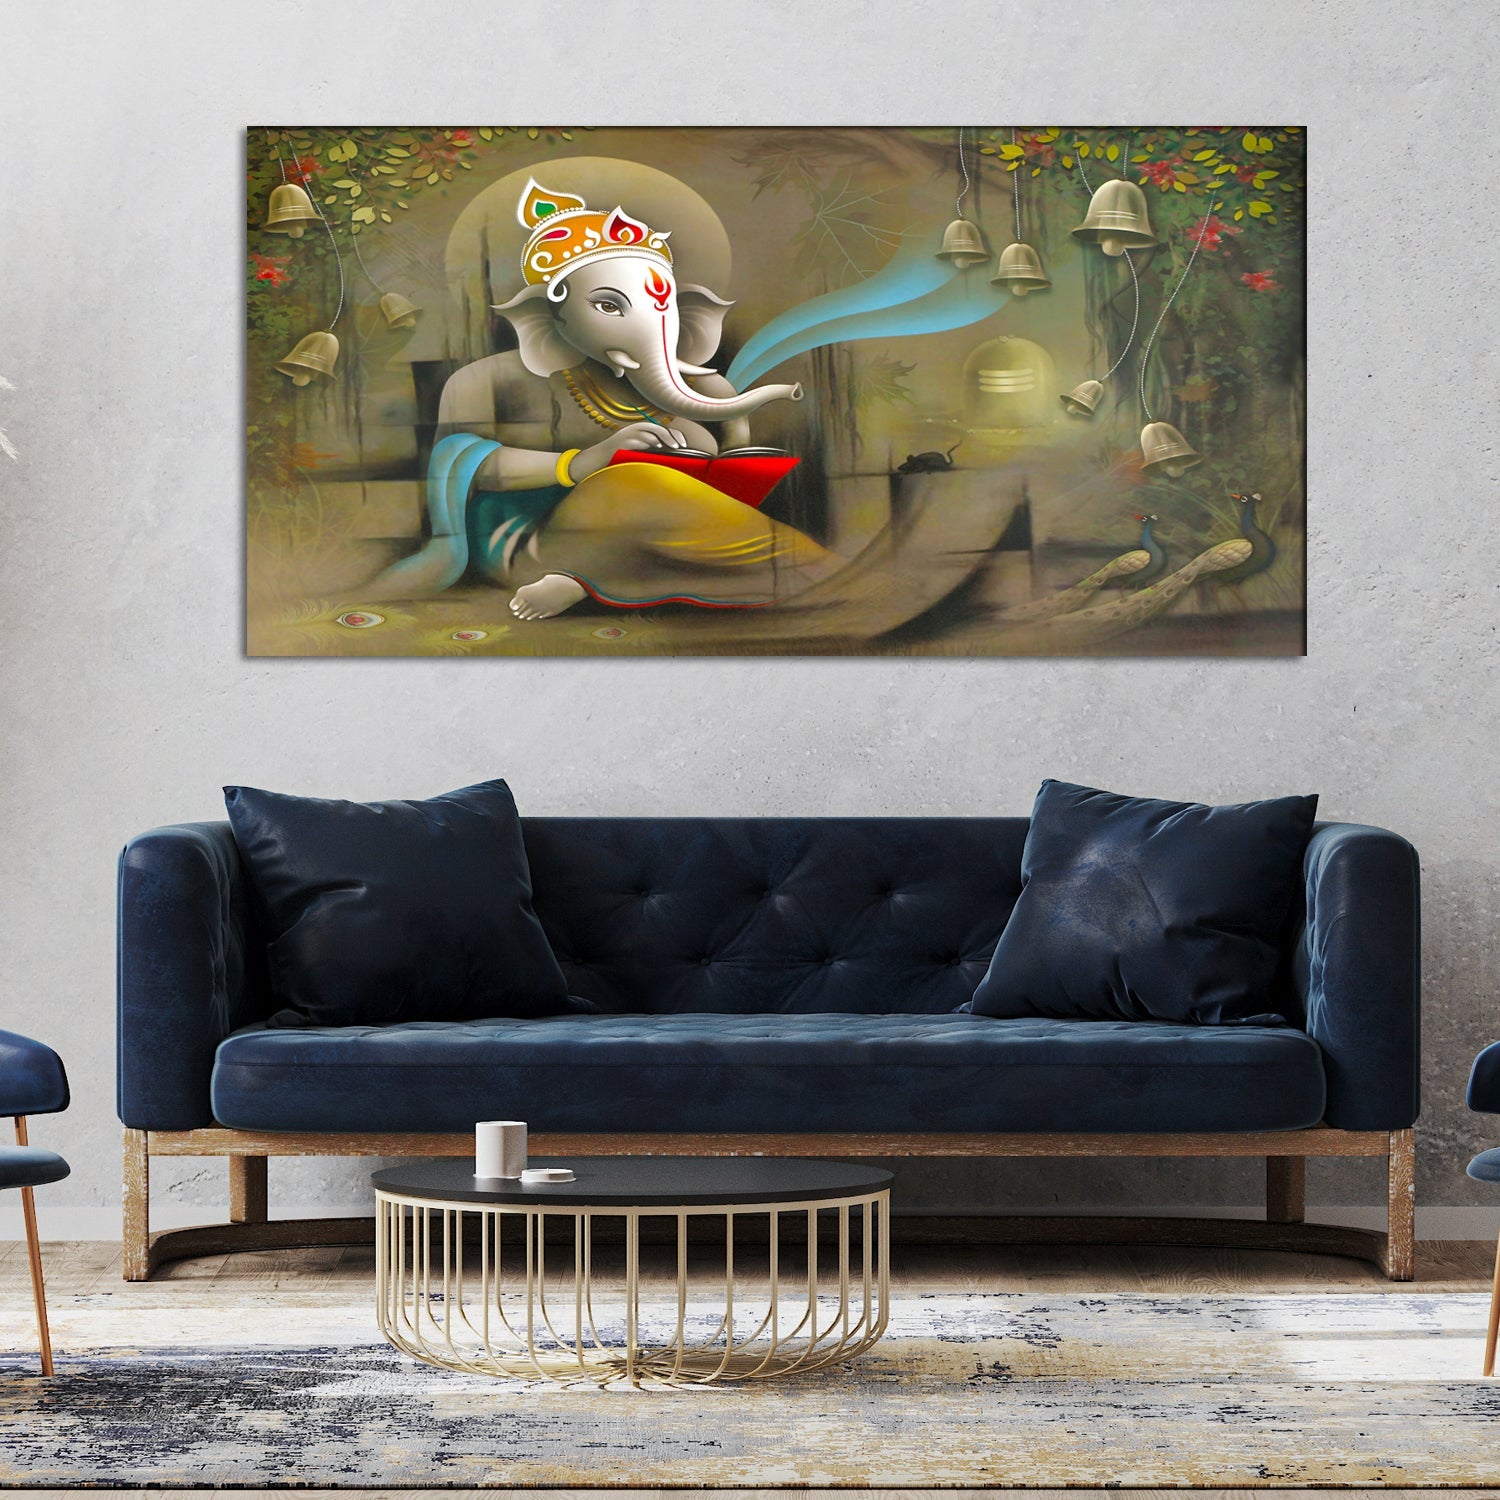 Beautiful Lord Ganesha Wall Painting for Home decor